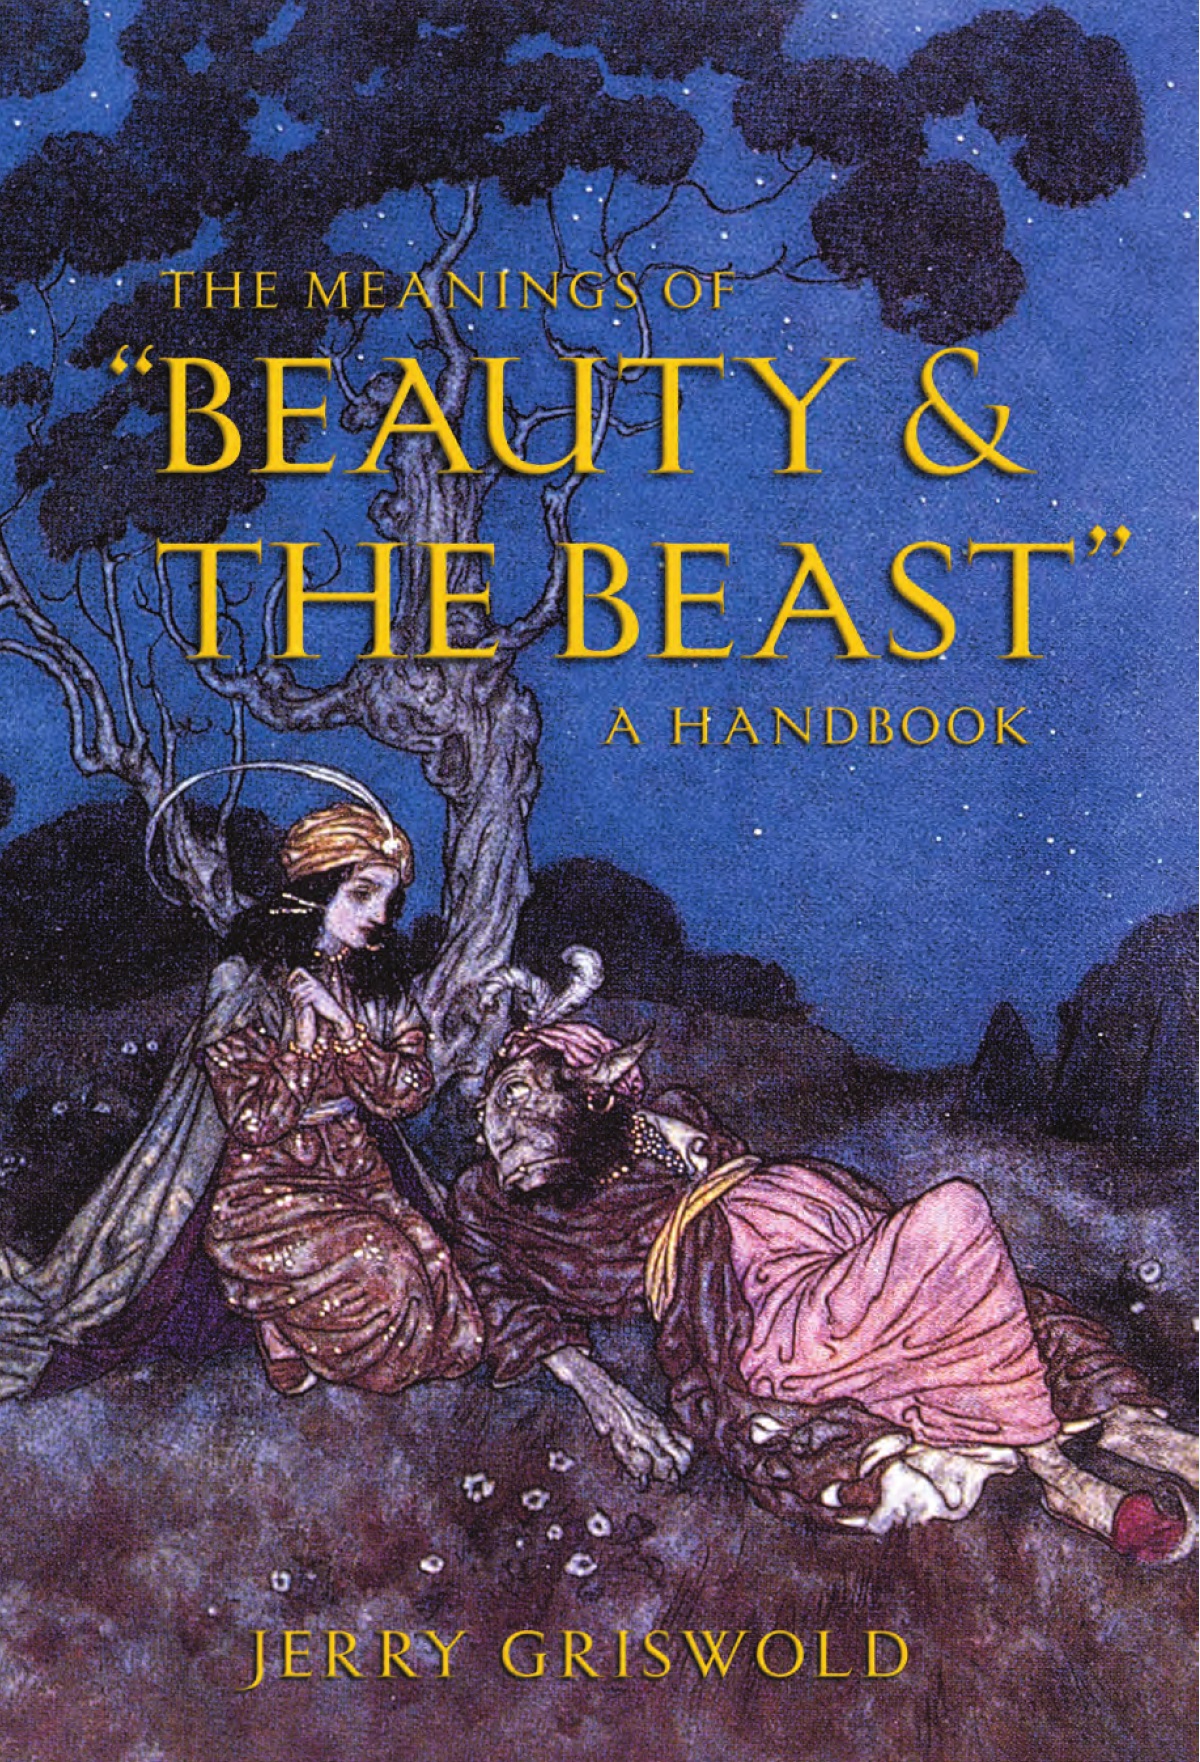 beauty and the beast essay